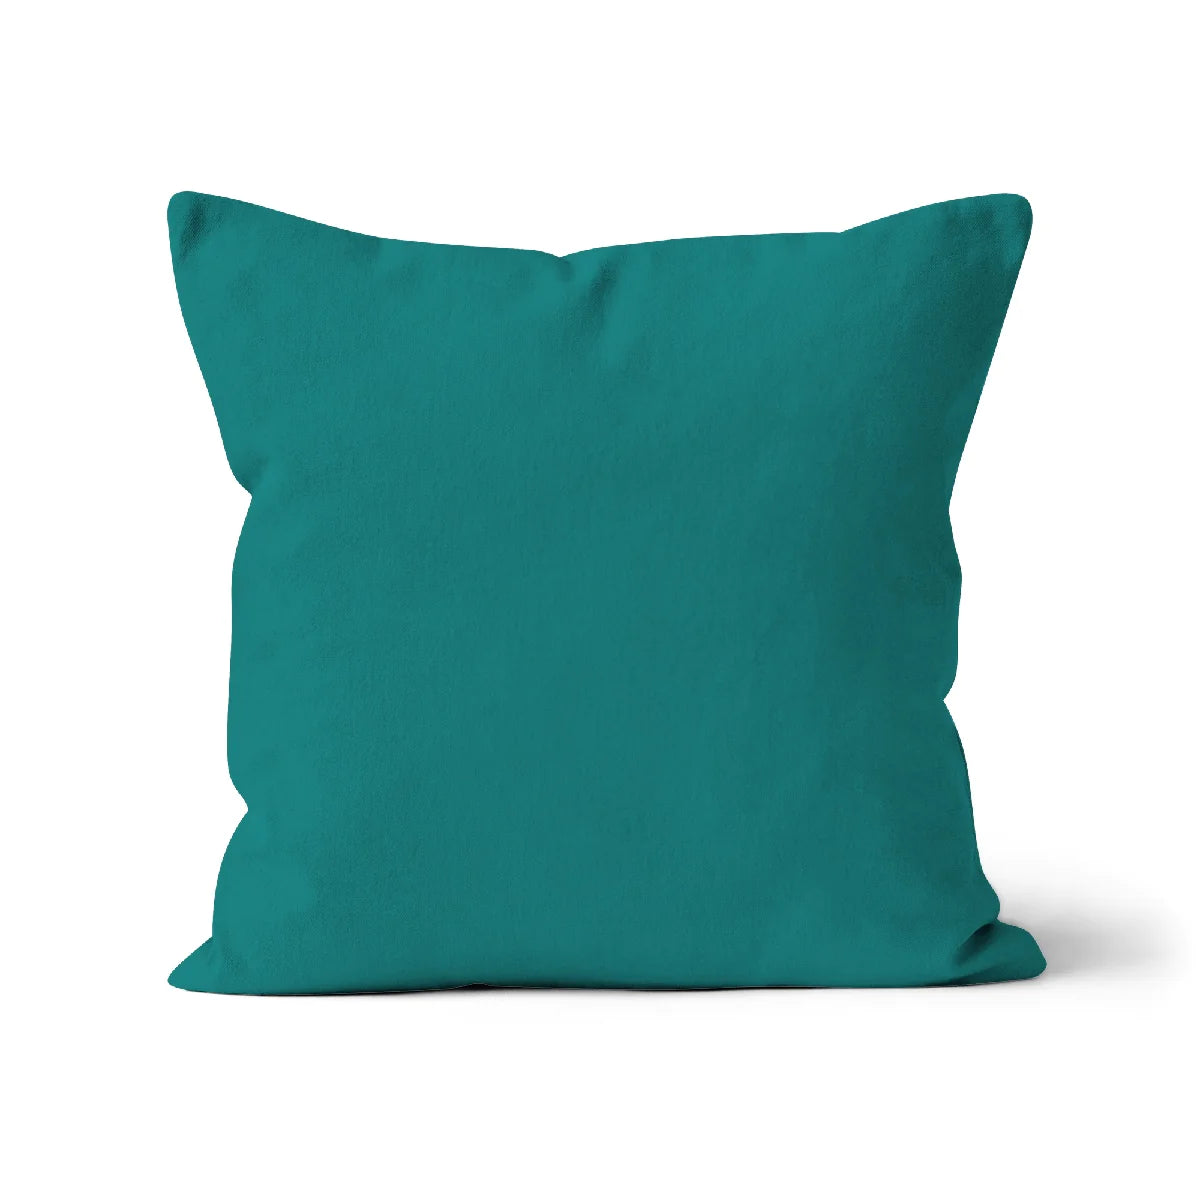 Teal colour cotton cushion cover. Teal blue-green cushion cover. Teal pillow cover. Organic cotton. Square cushion cover. Unfilled cushion. Organic cotton cushion. Made in the UK. British-Made. Sustainable homeware. Plain cushion covers. Eco-friendly cushion. High-quality cushion covers. Machine washable cushion covers. Plain colour cushion covers.